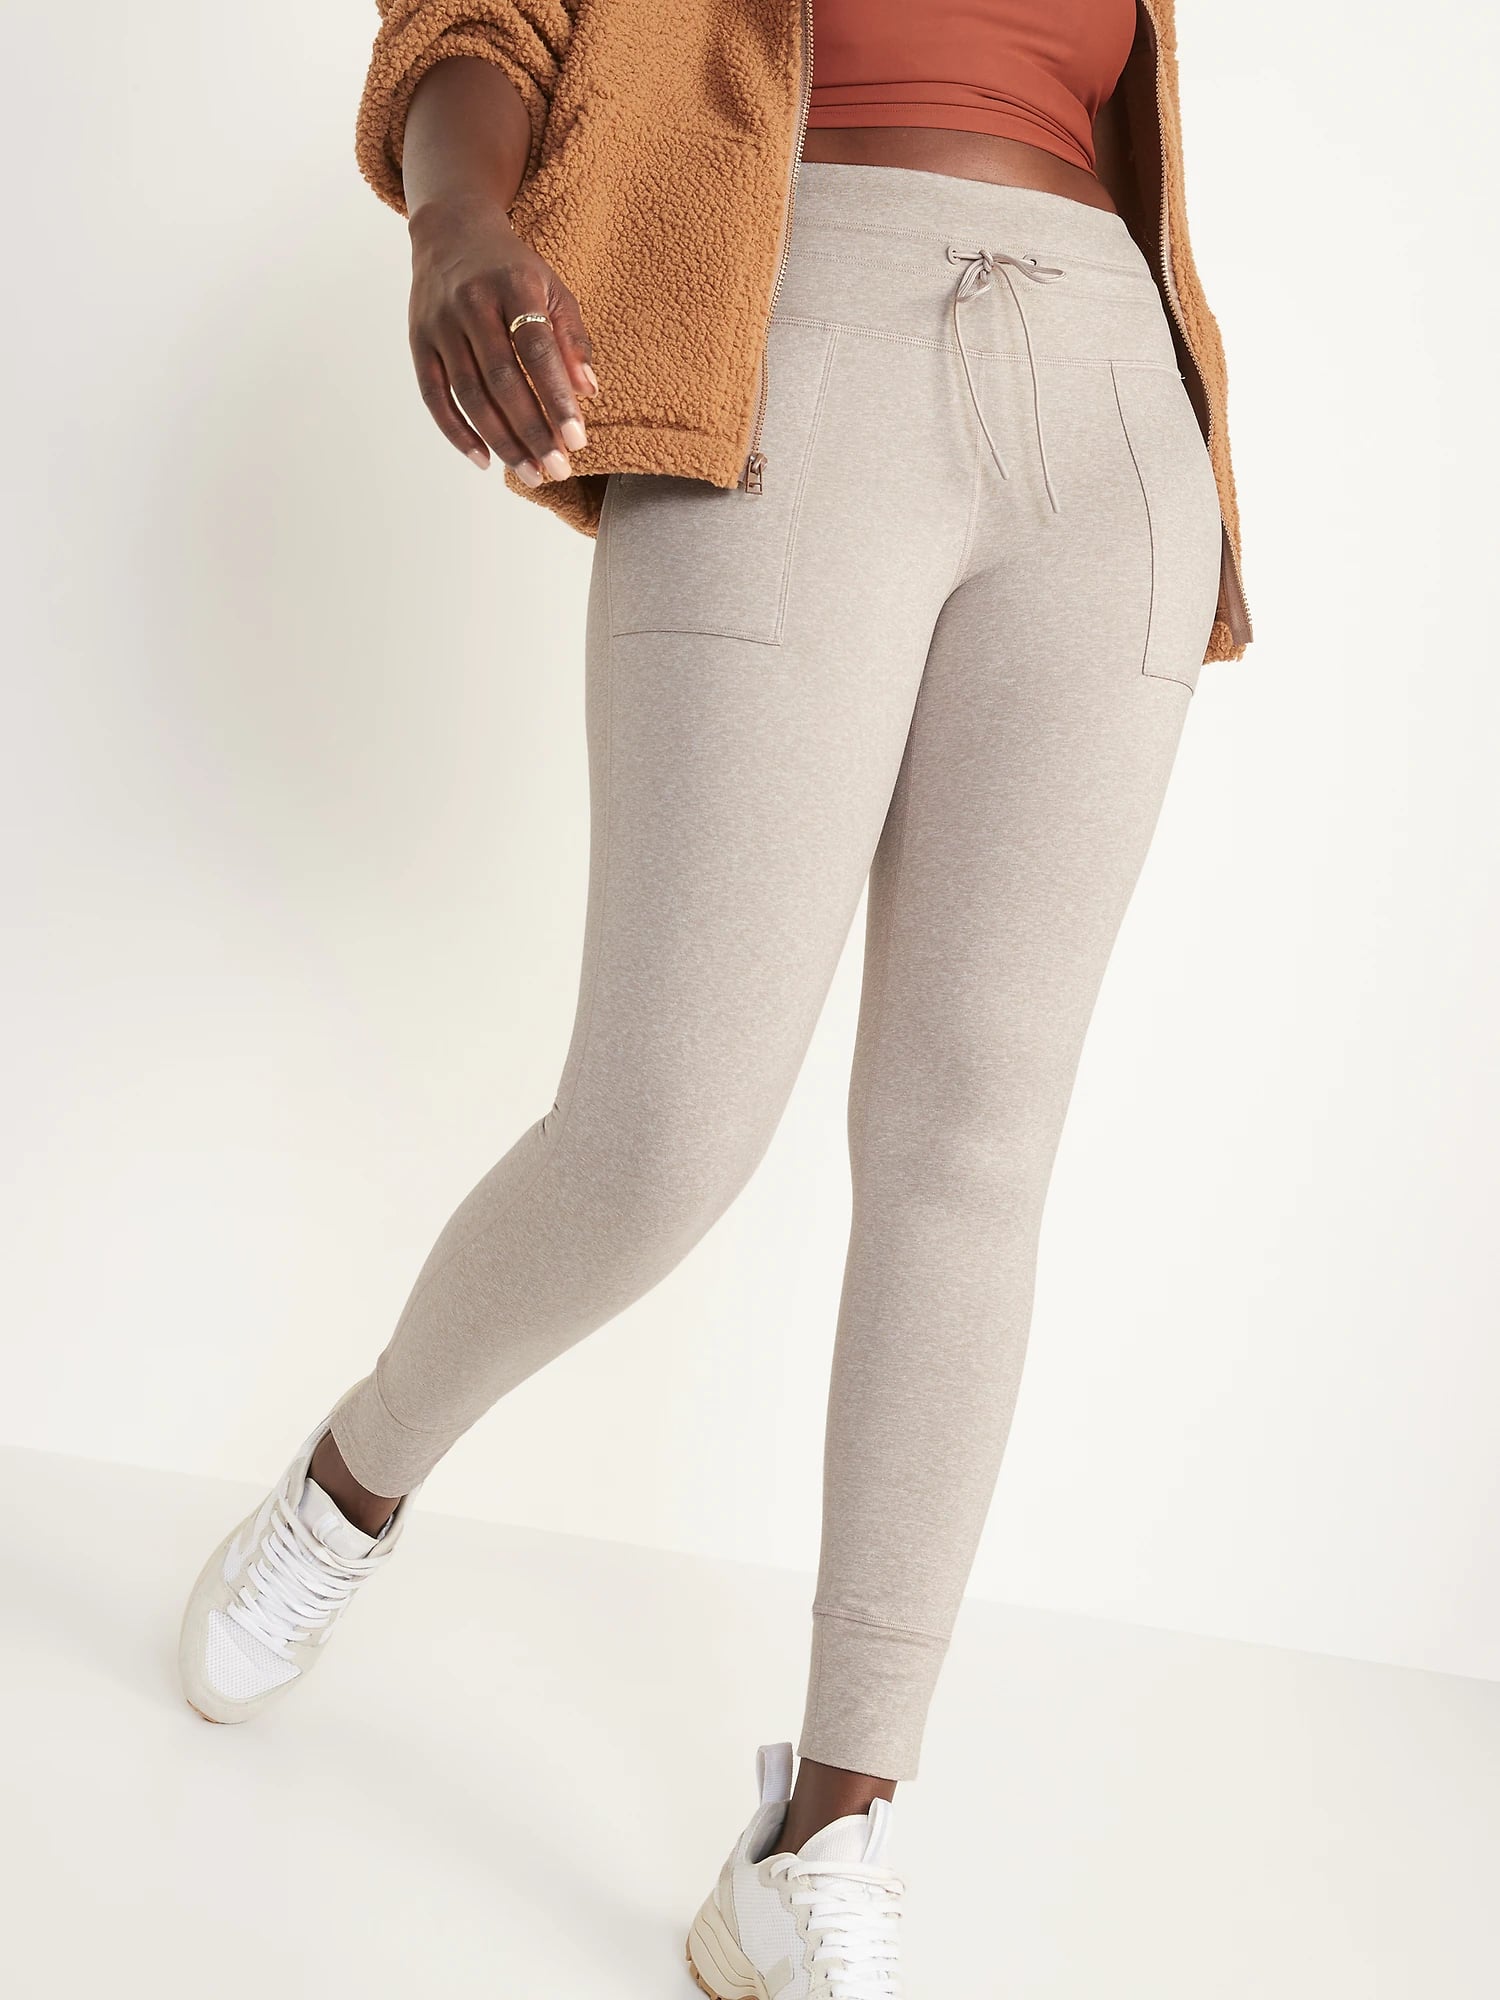 Thick Warm Leggings With Pockets at Old Navy, Editor Review